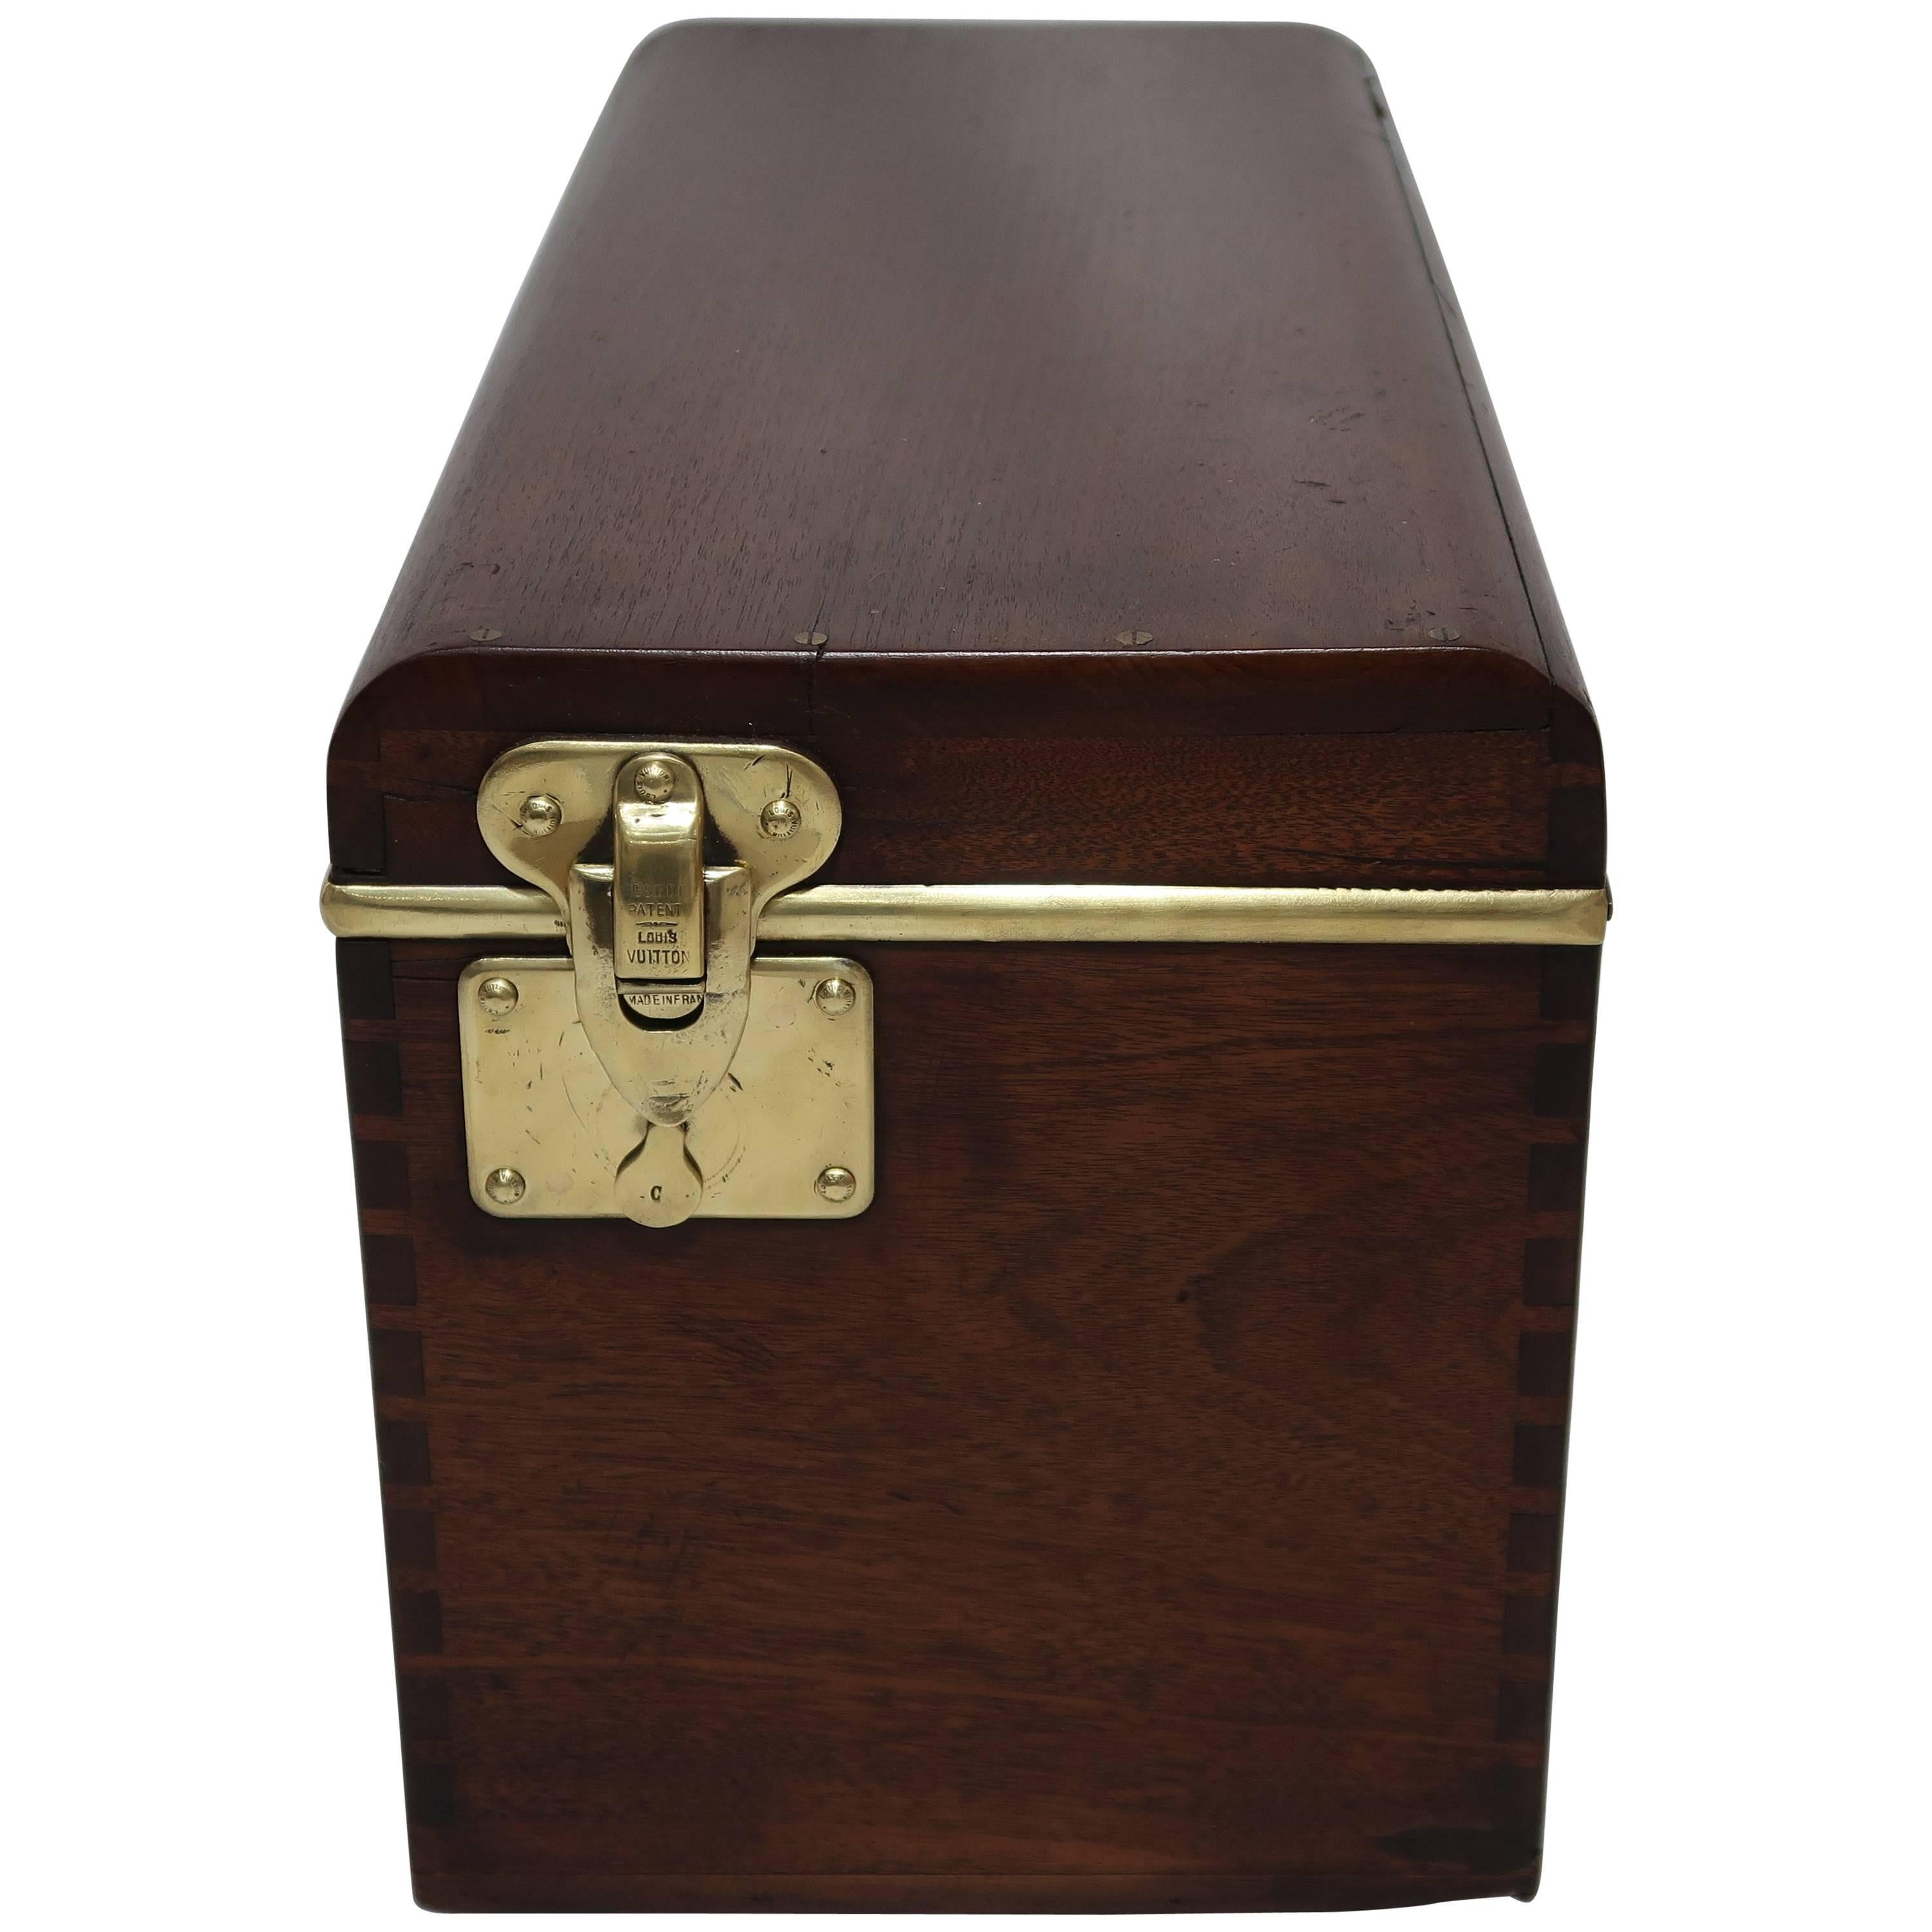 1900s Louis Vuitton Wooden Tool Box Trunk, 1 of the 100 Legendary Trunks For Sale